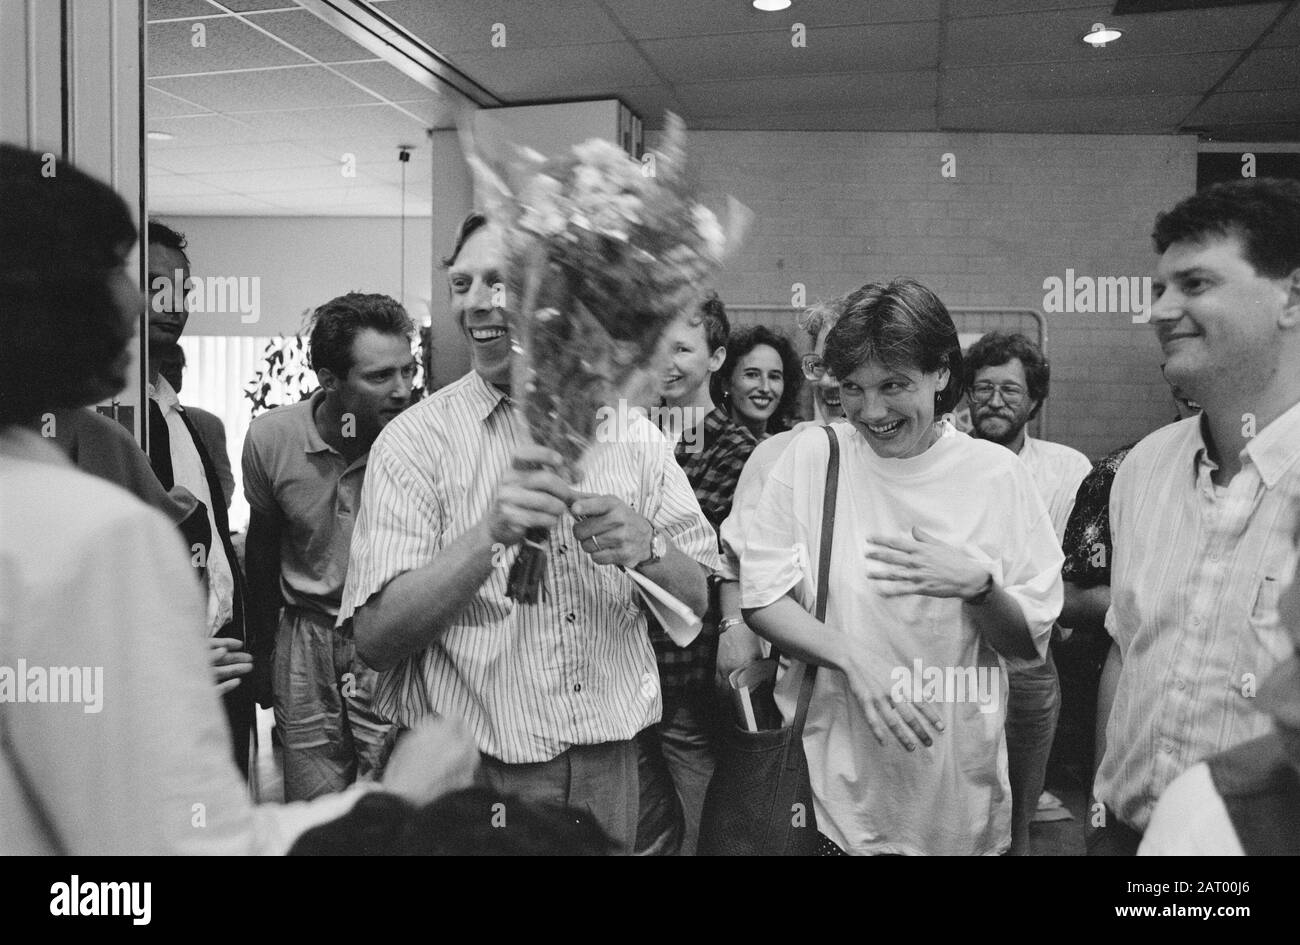 Congress of the PSP in Amsterdam with the determination of candidates for elections  Wilbert Willems (with flowers) and list leader Andrée van Es Date: 1 July 1989 Location: Amsterdam, Noord-Holland Keywords: flowers, congresses, candidates, politics, elections Personal name: Es, Andrée van, Willem, Wilbert Institution name: PSP Stock Photo